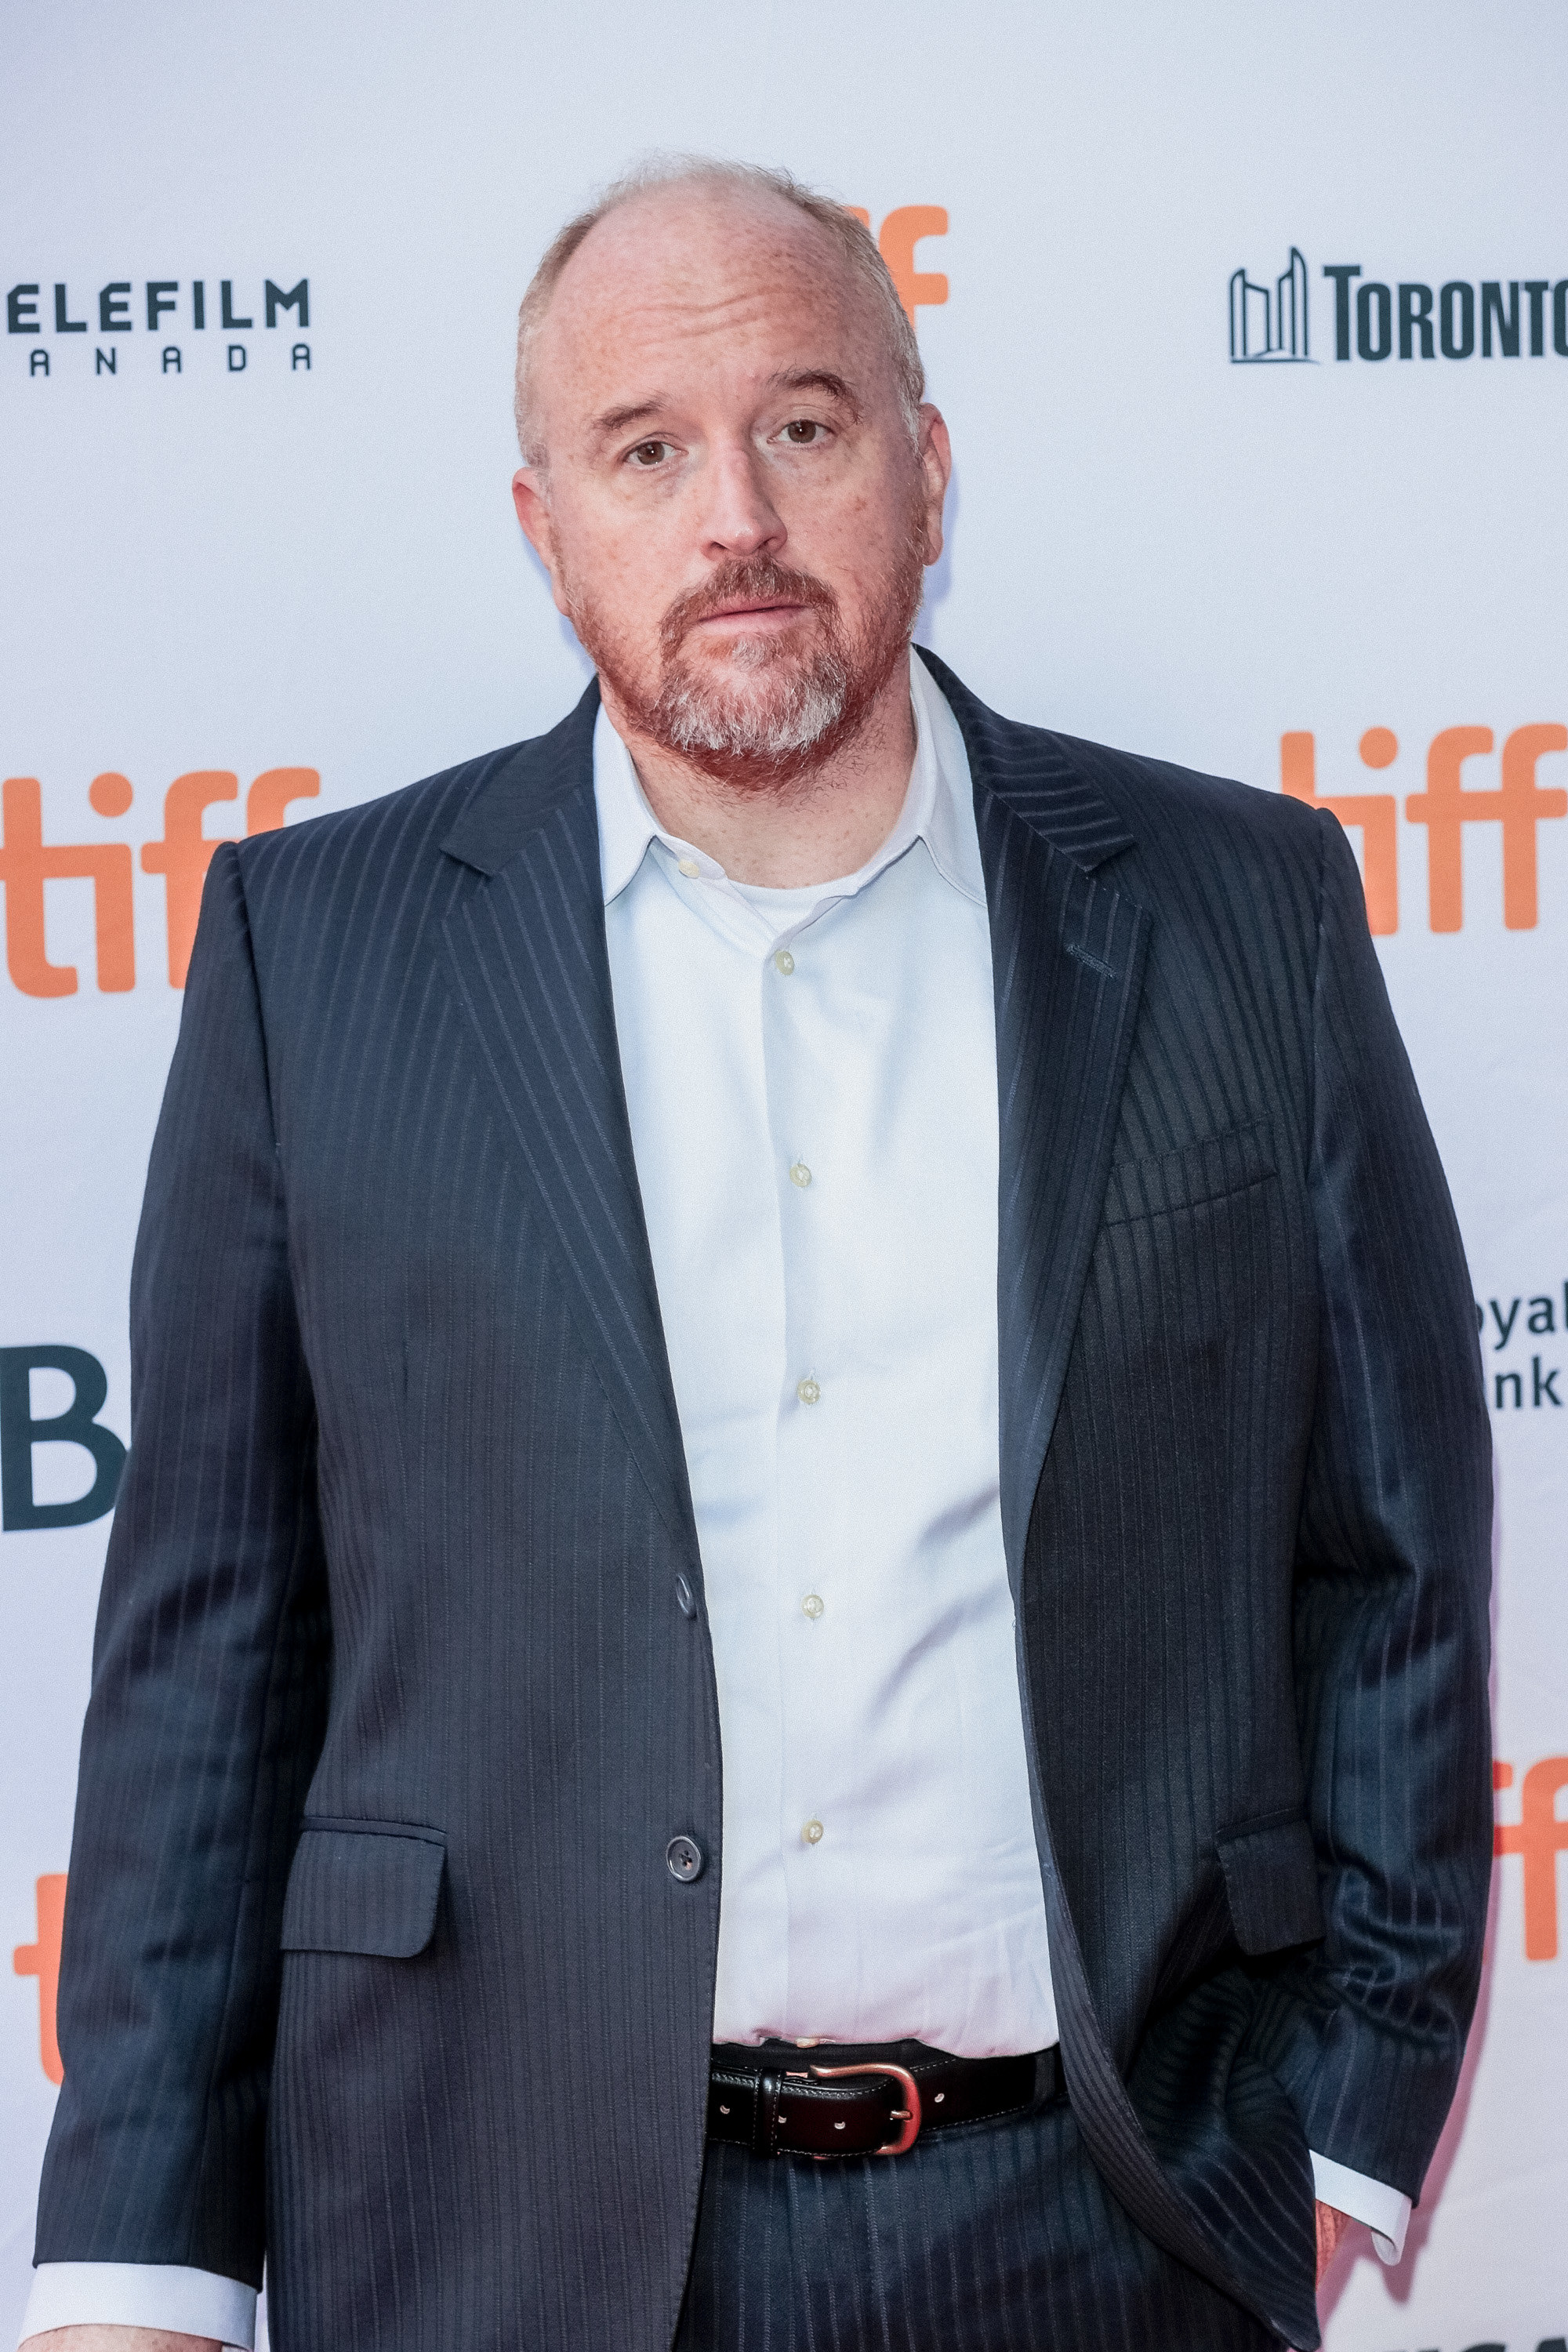 Louis CK at a red carpet event